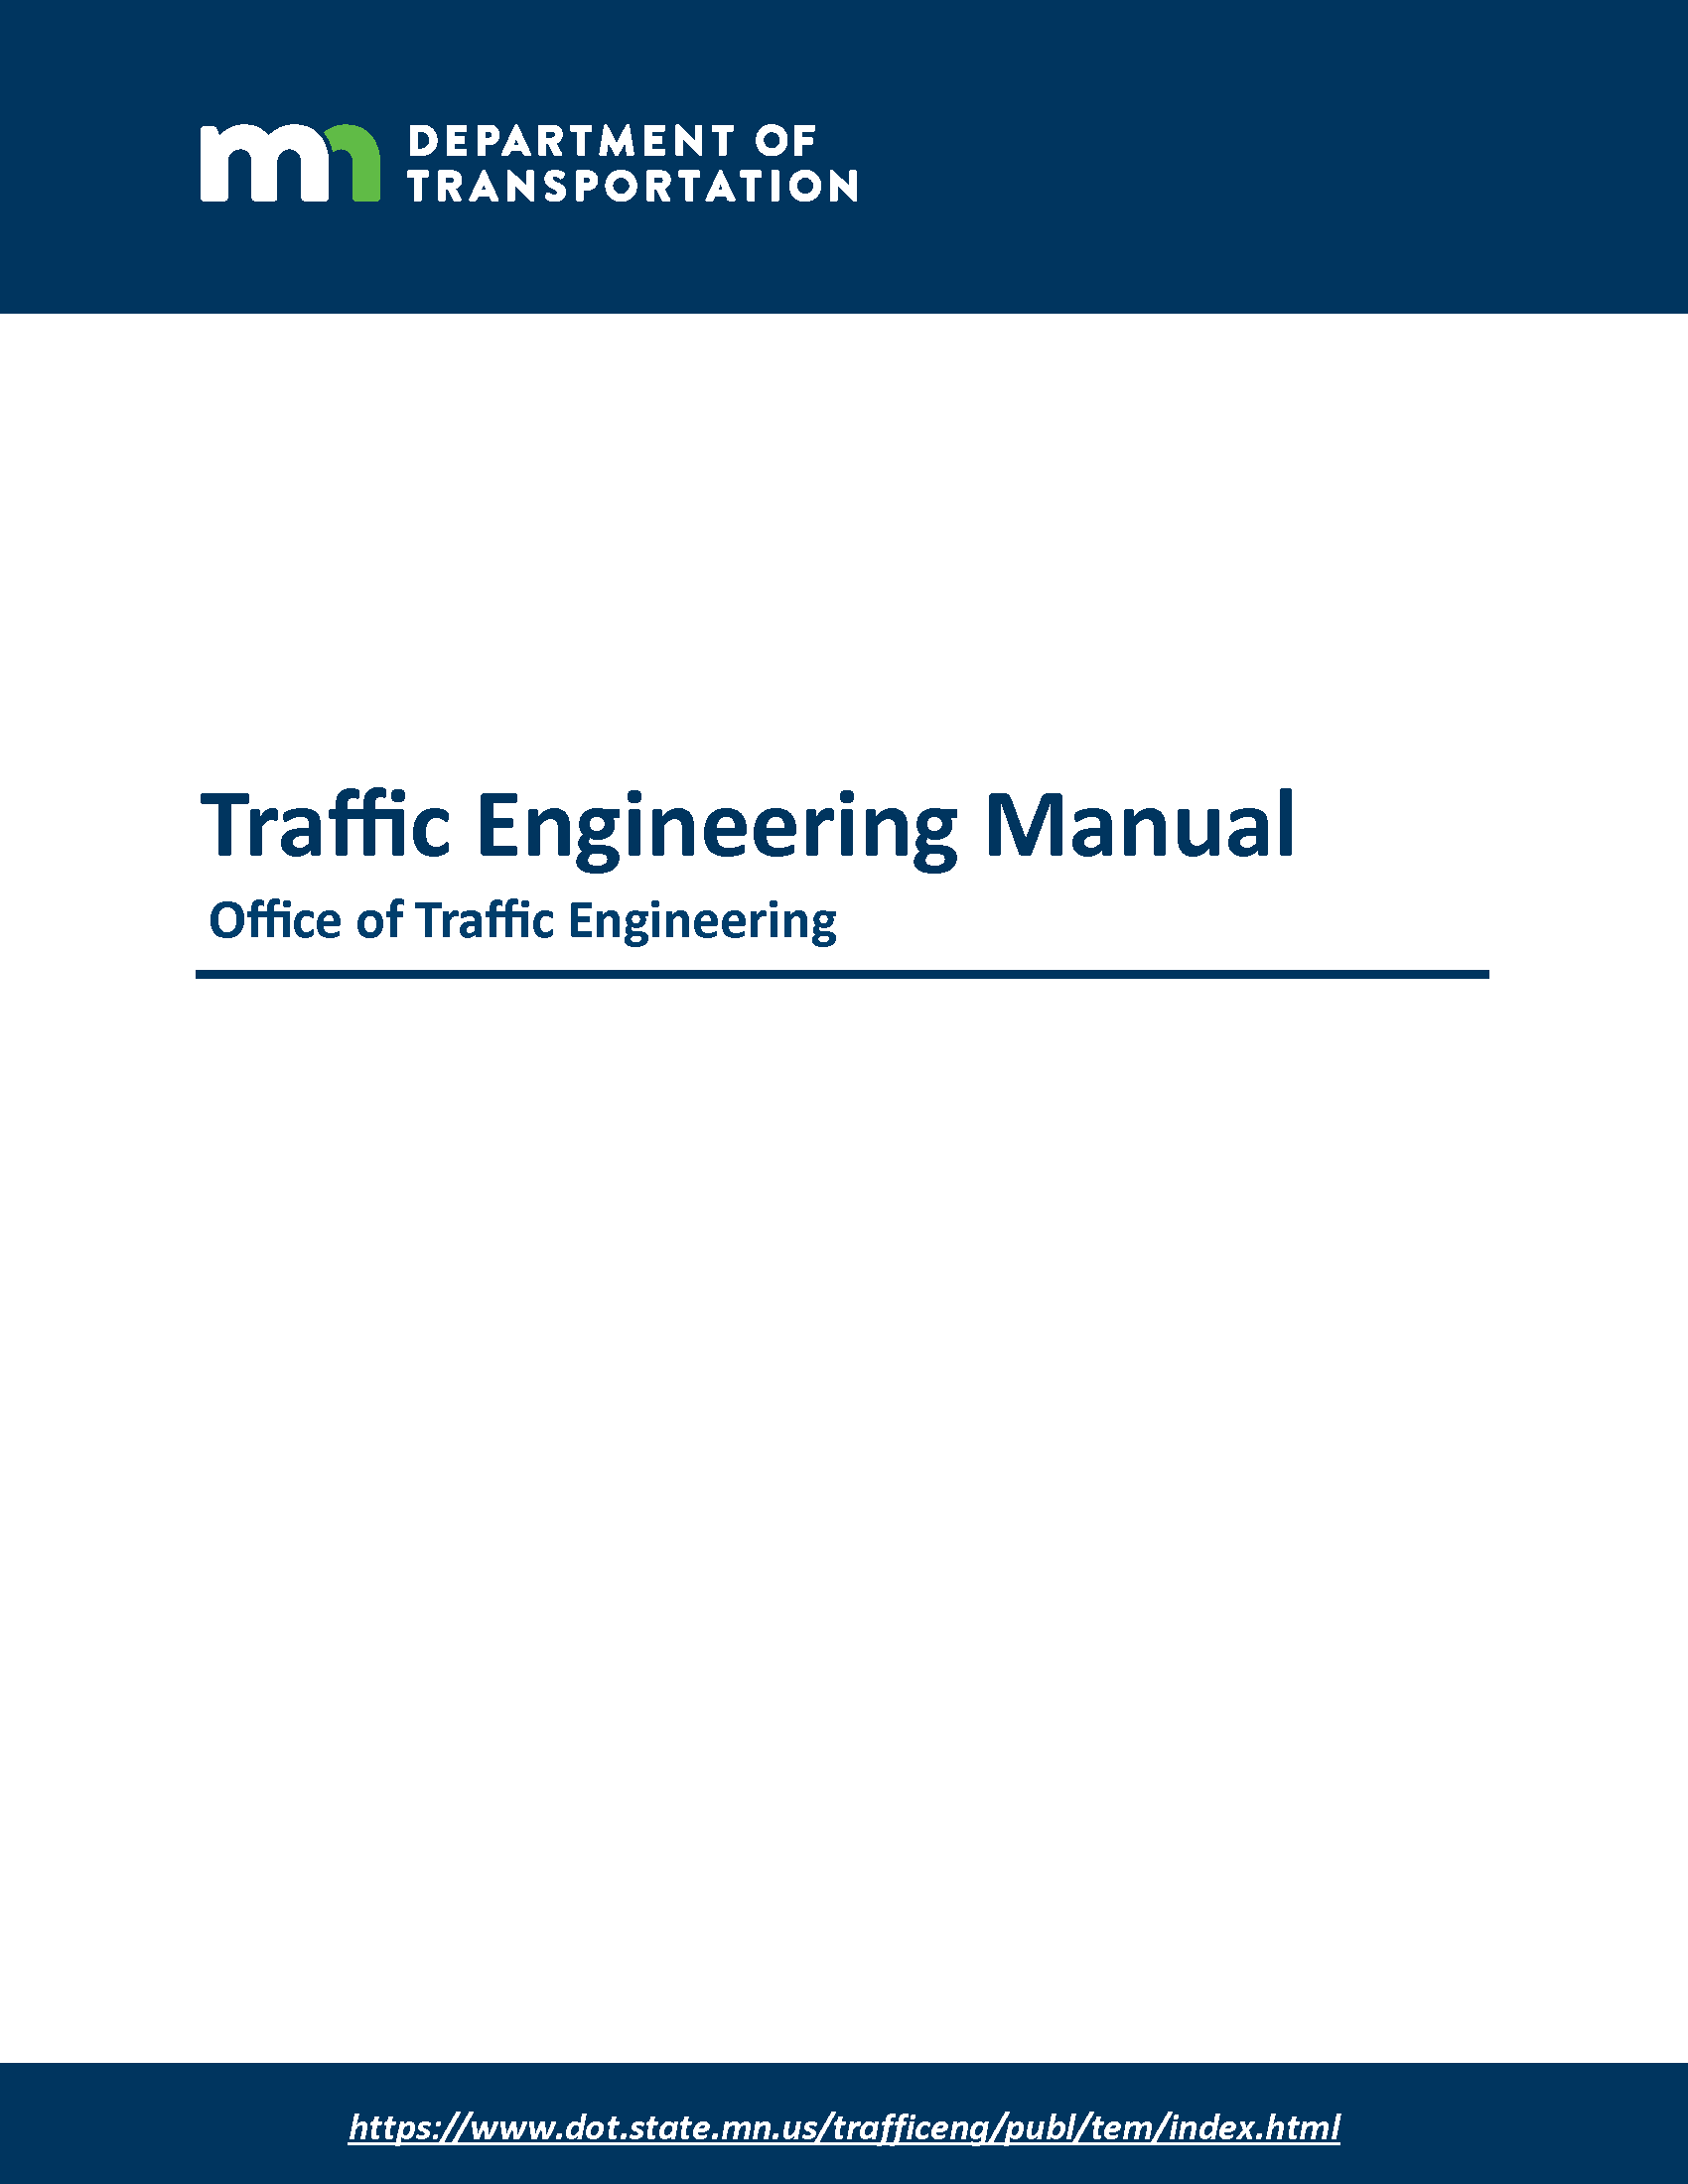 traffic engineering manual cover